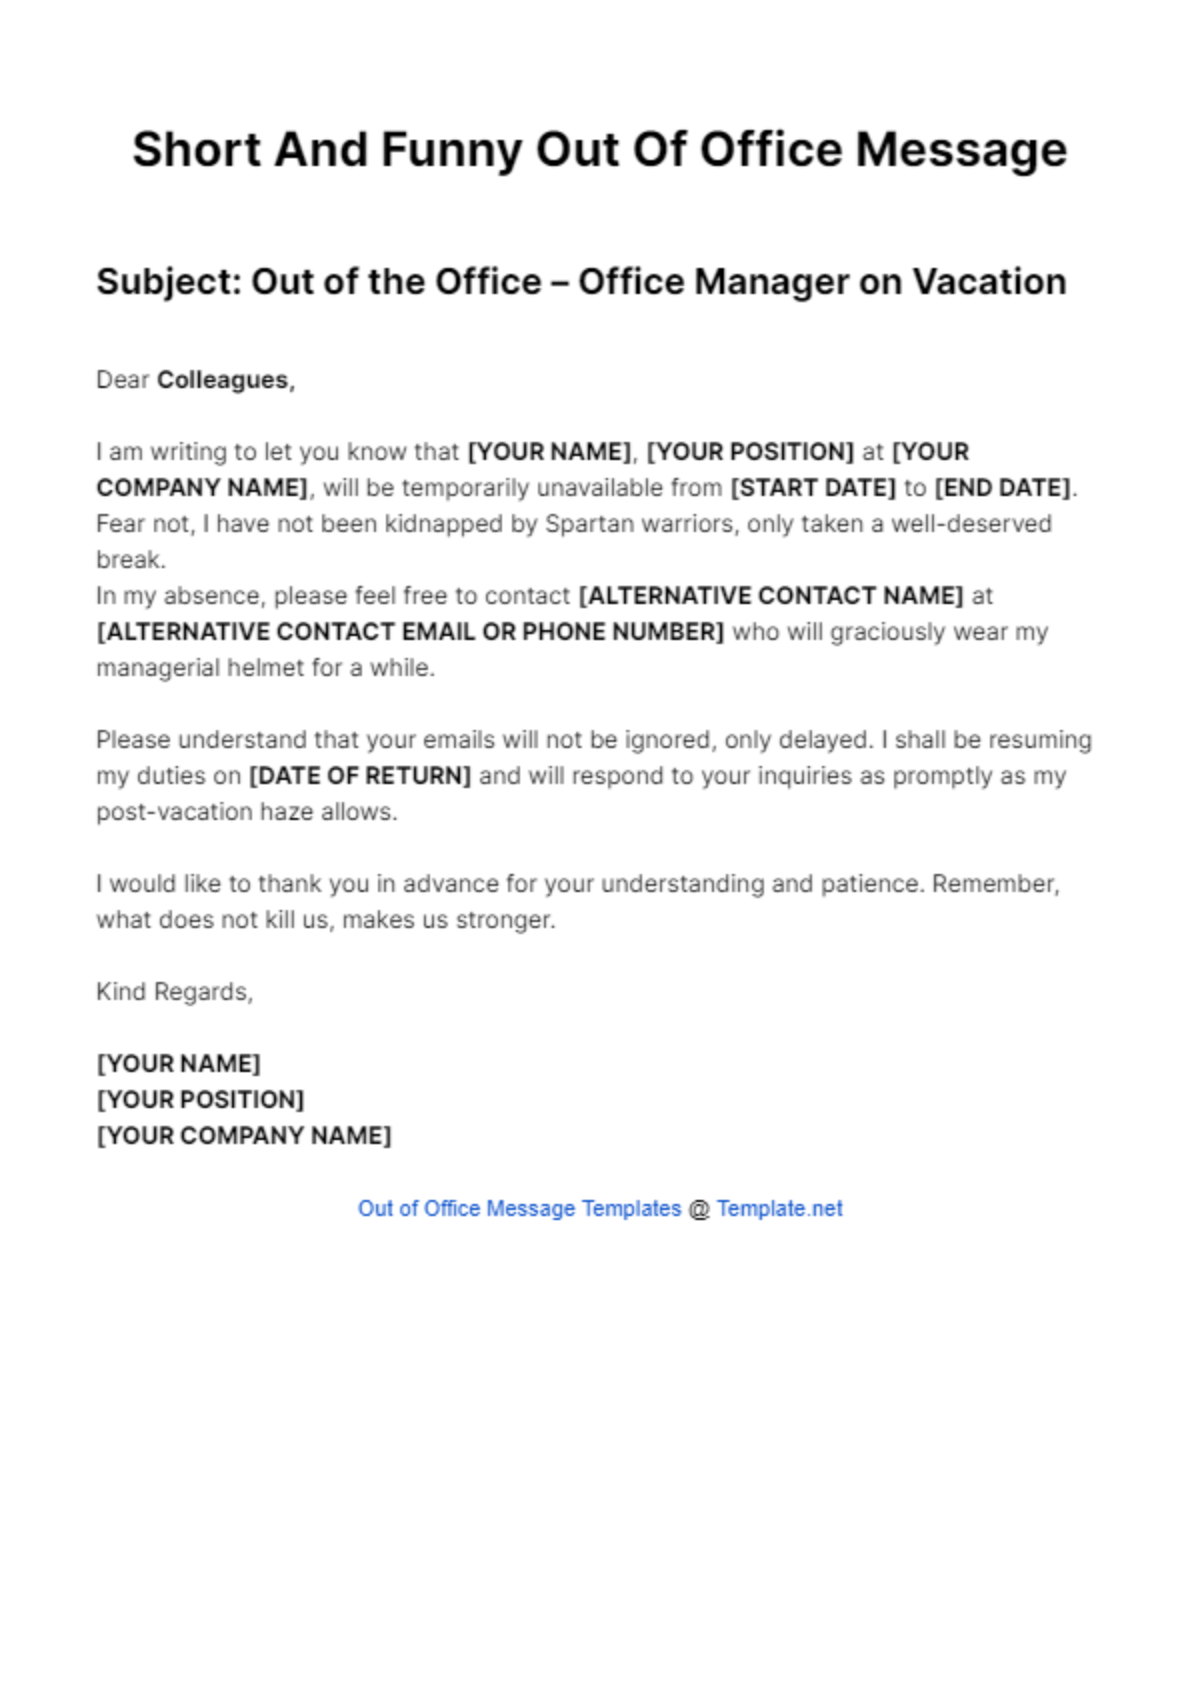 Short And Funny Out Of Office Message Template